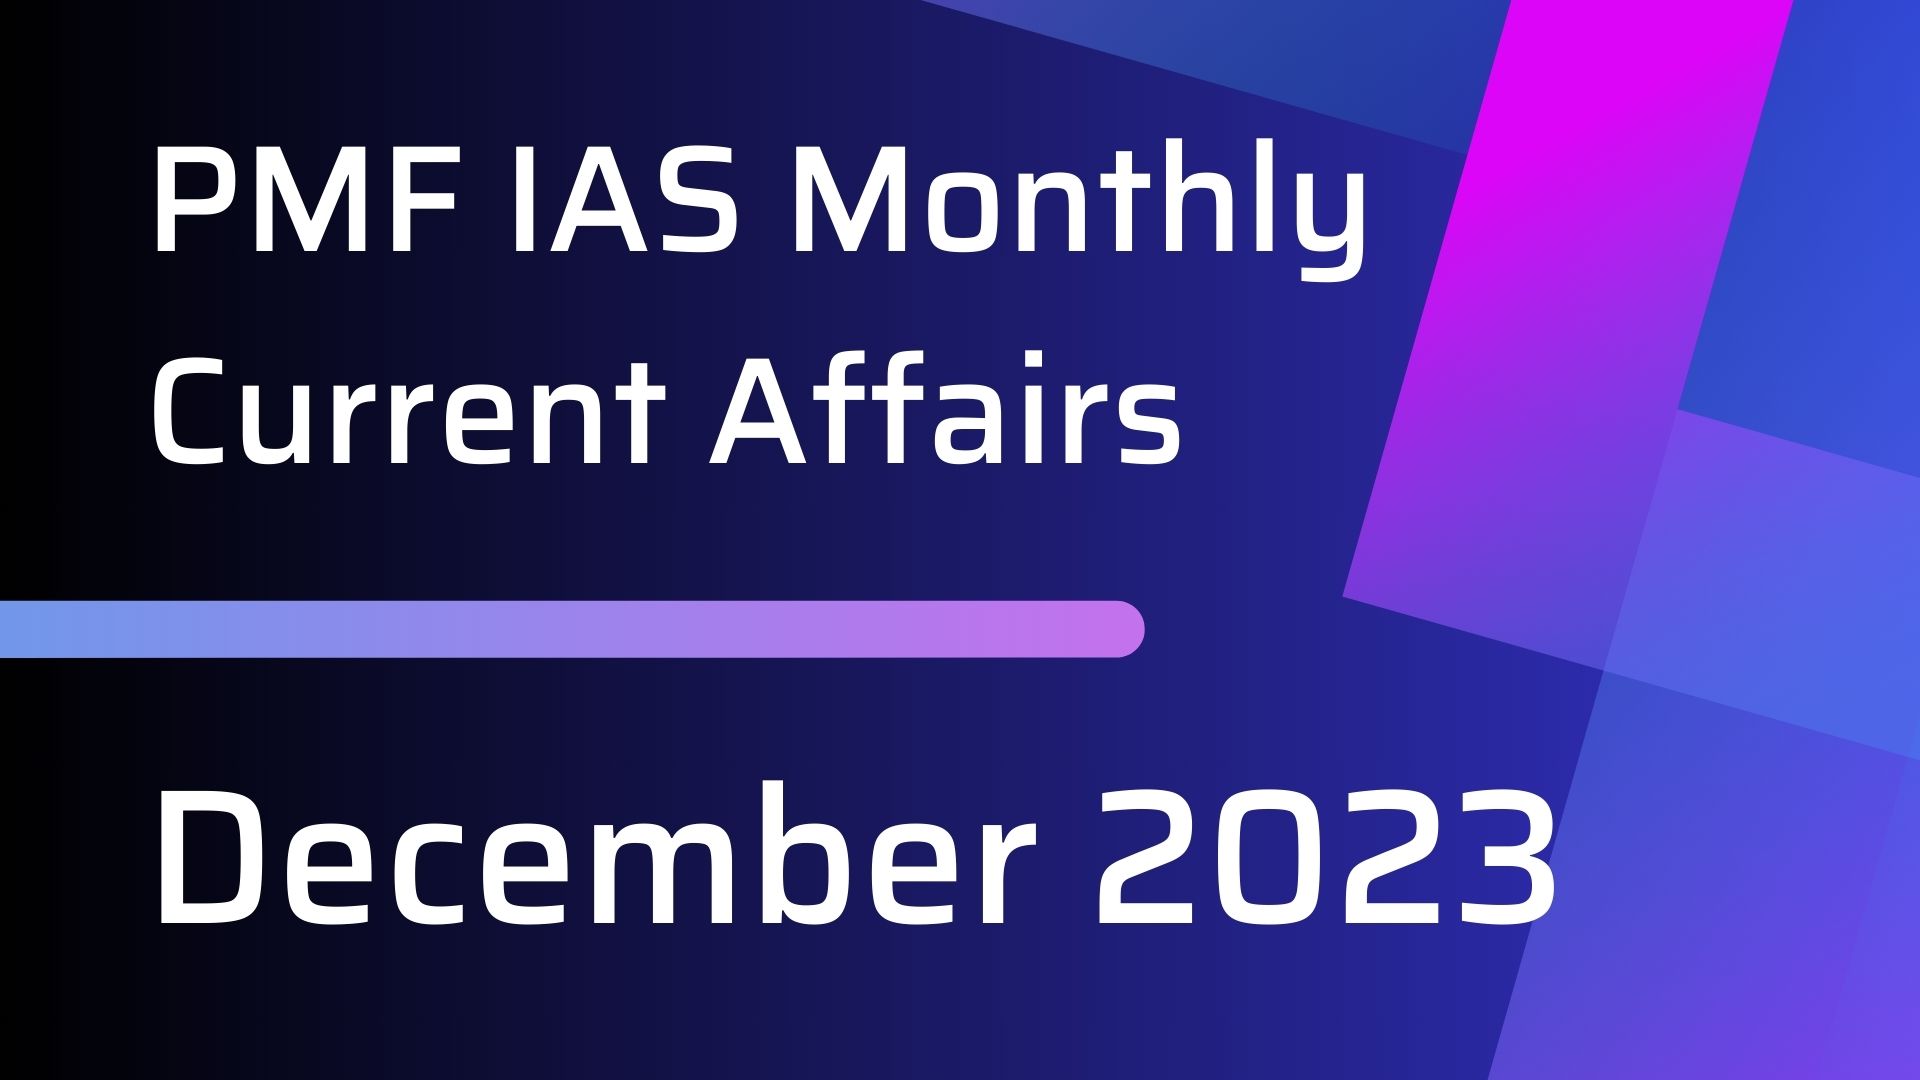 PMF IAS Daily Current Affairs December